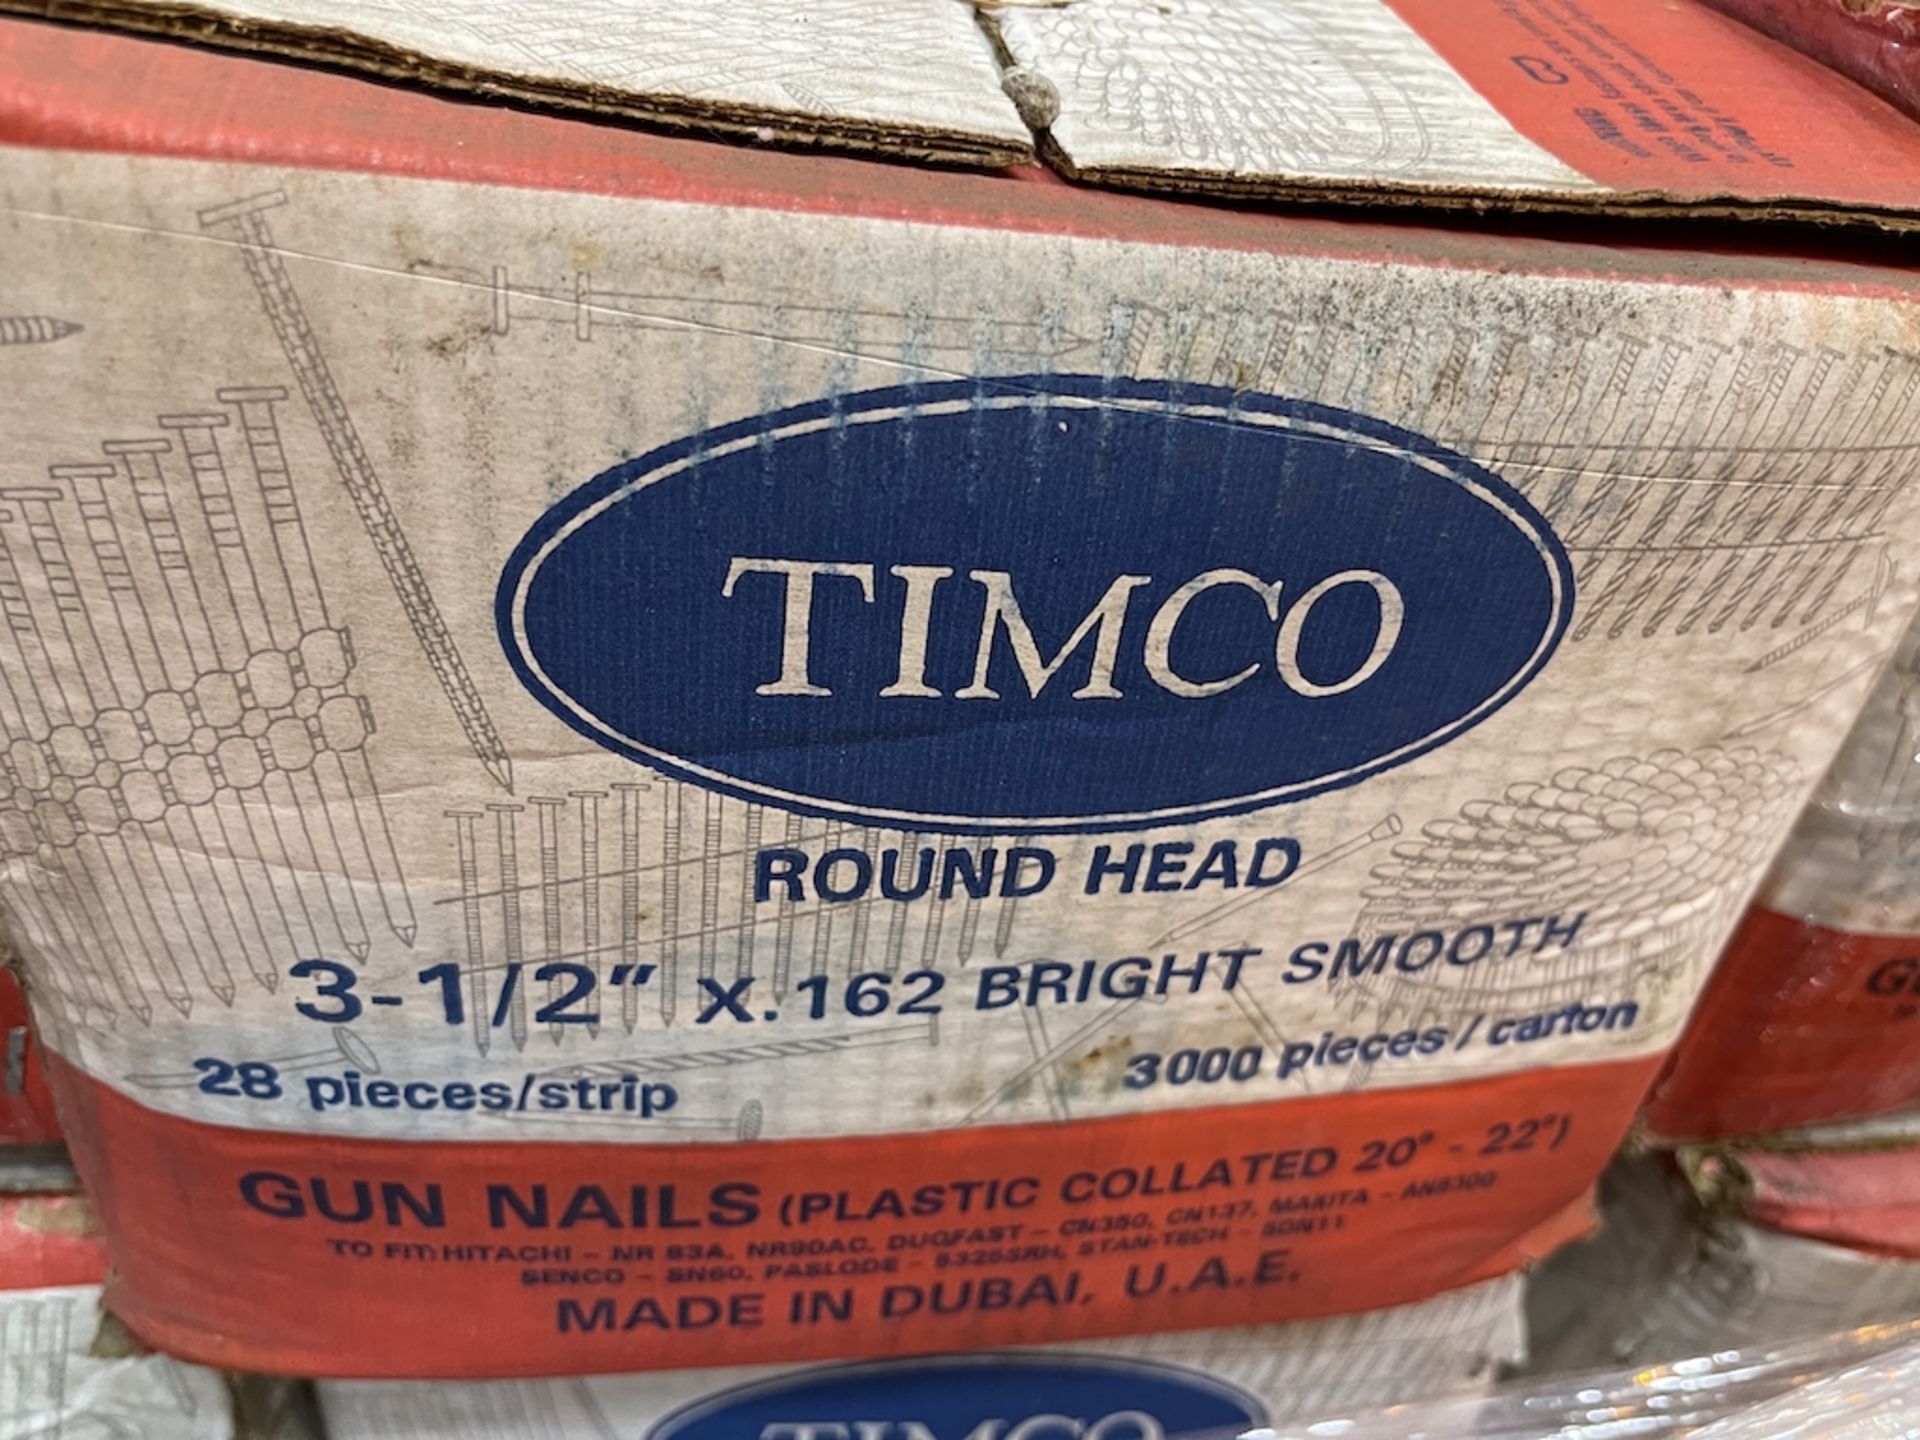 Huge Lot of Timco Round Head Nails 3-1/2 X .162 (AM40) - Image 4 of 7